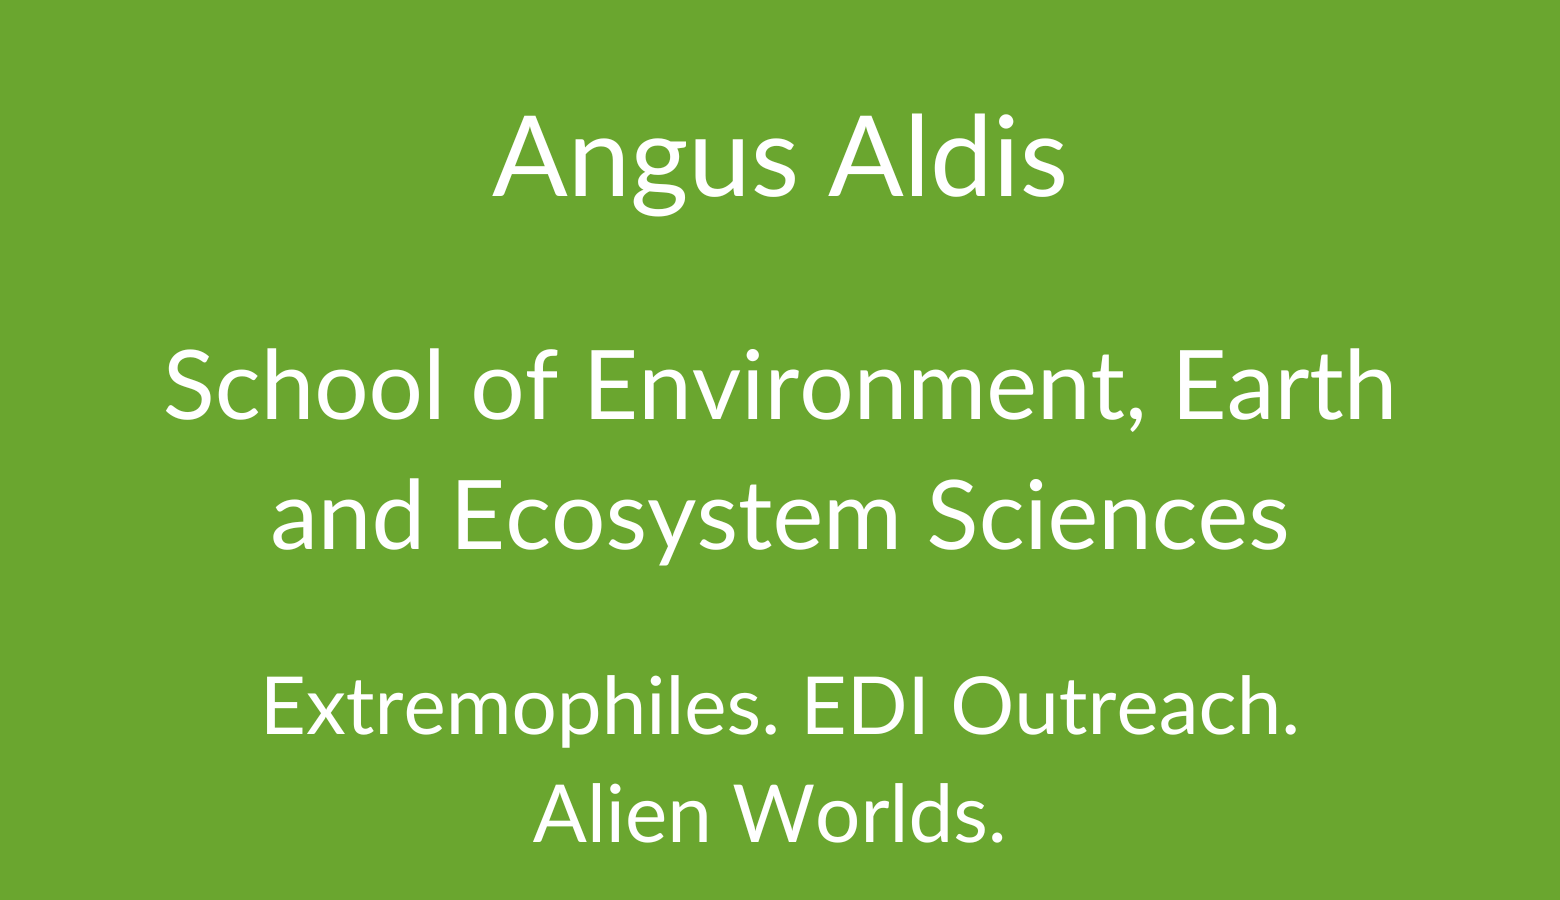 Angus Aldis. School of Environment, Earth and Ecosystem Sciences. Extremophiles. EDI Outreach. Alien Worlds. 